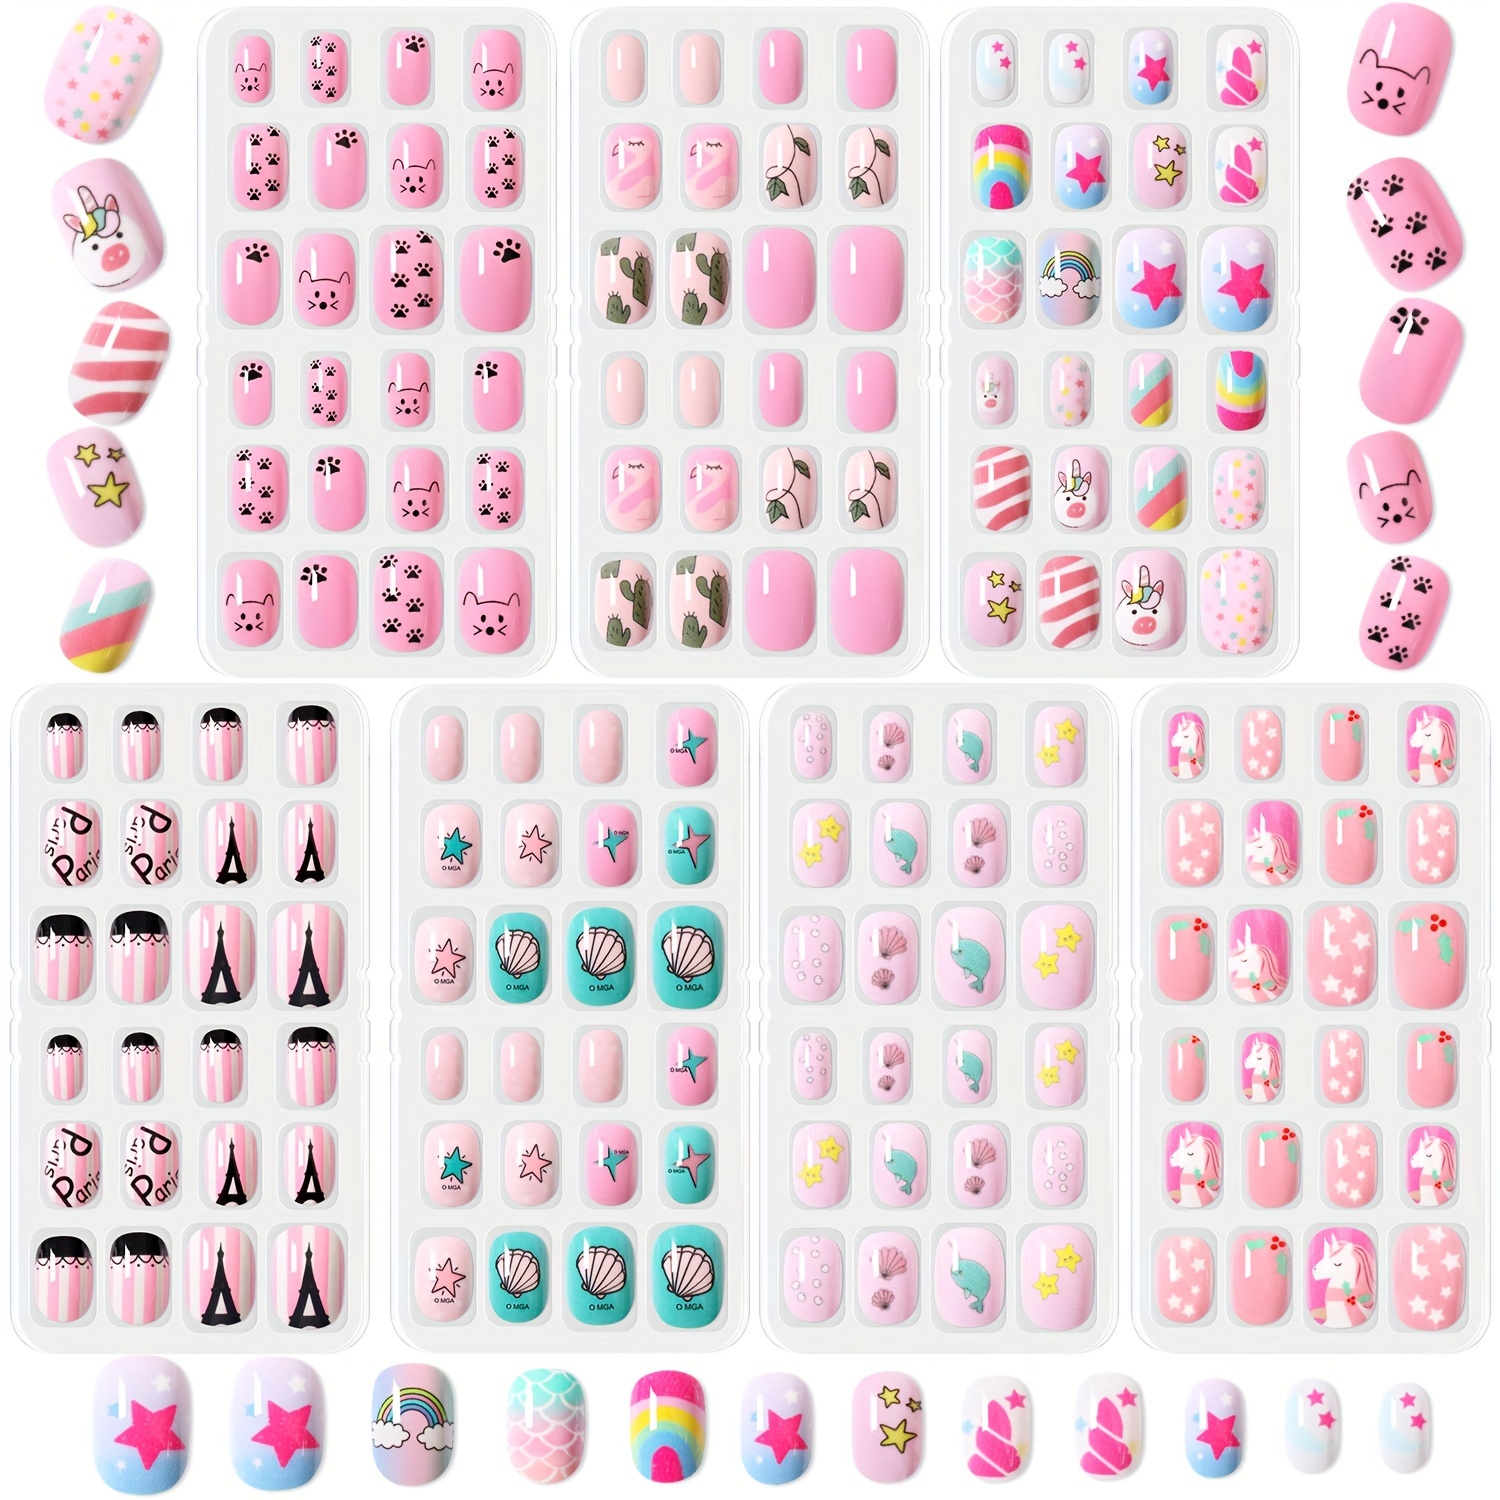 

7 Sets, 168 Pieces, Self-adhesive Pre-glued Kids Press-on Nails Set, Diverse Cute Patterns, Premium Acrylic Material, Safe & Harm-free For Girls